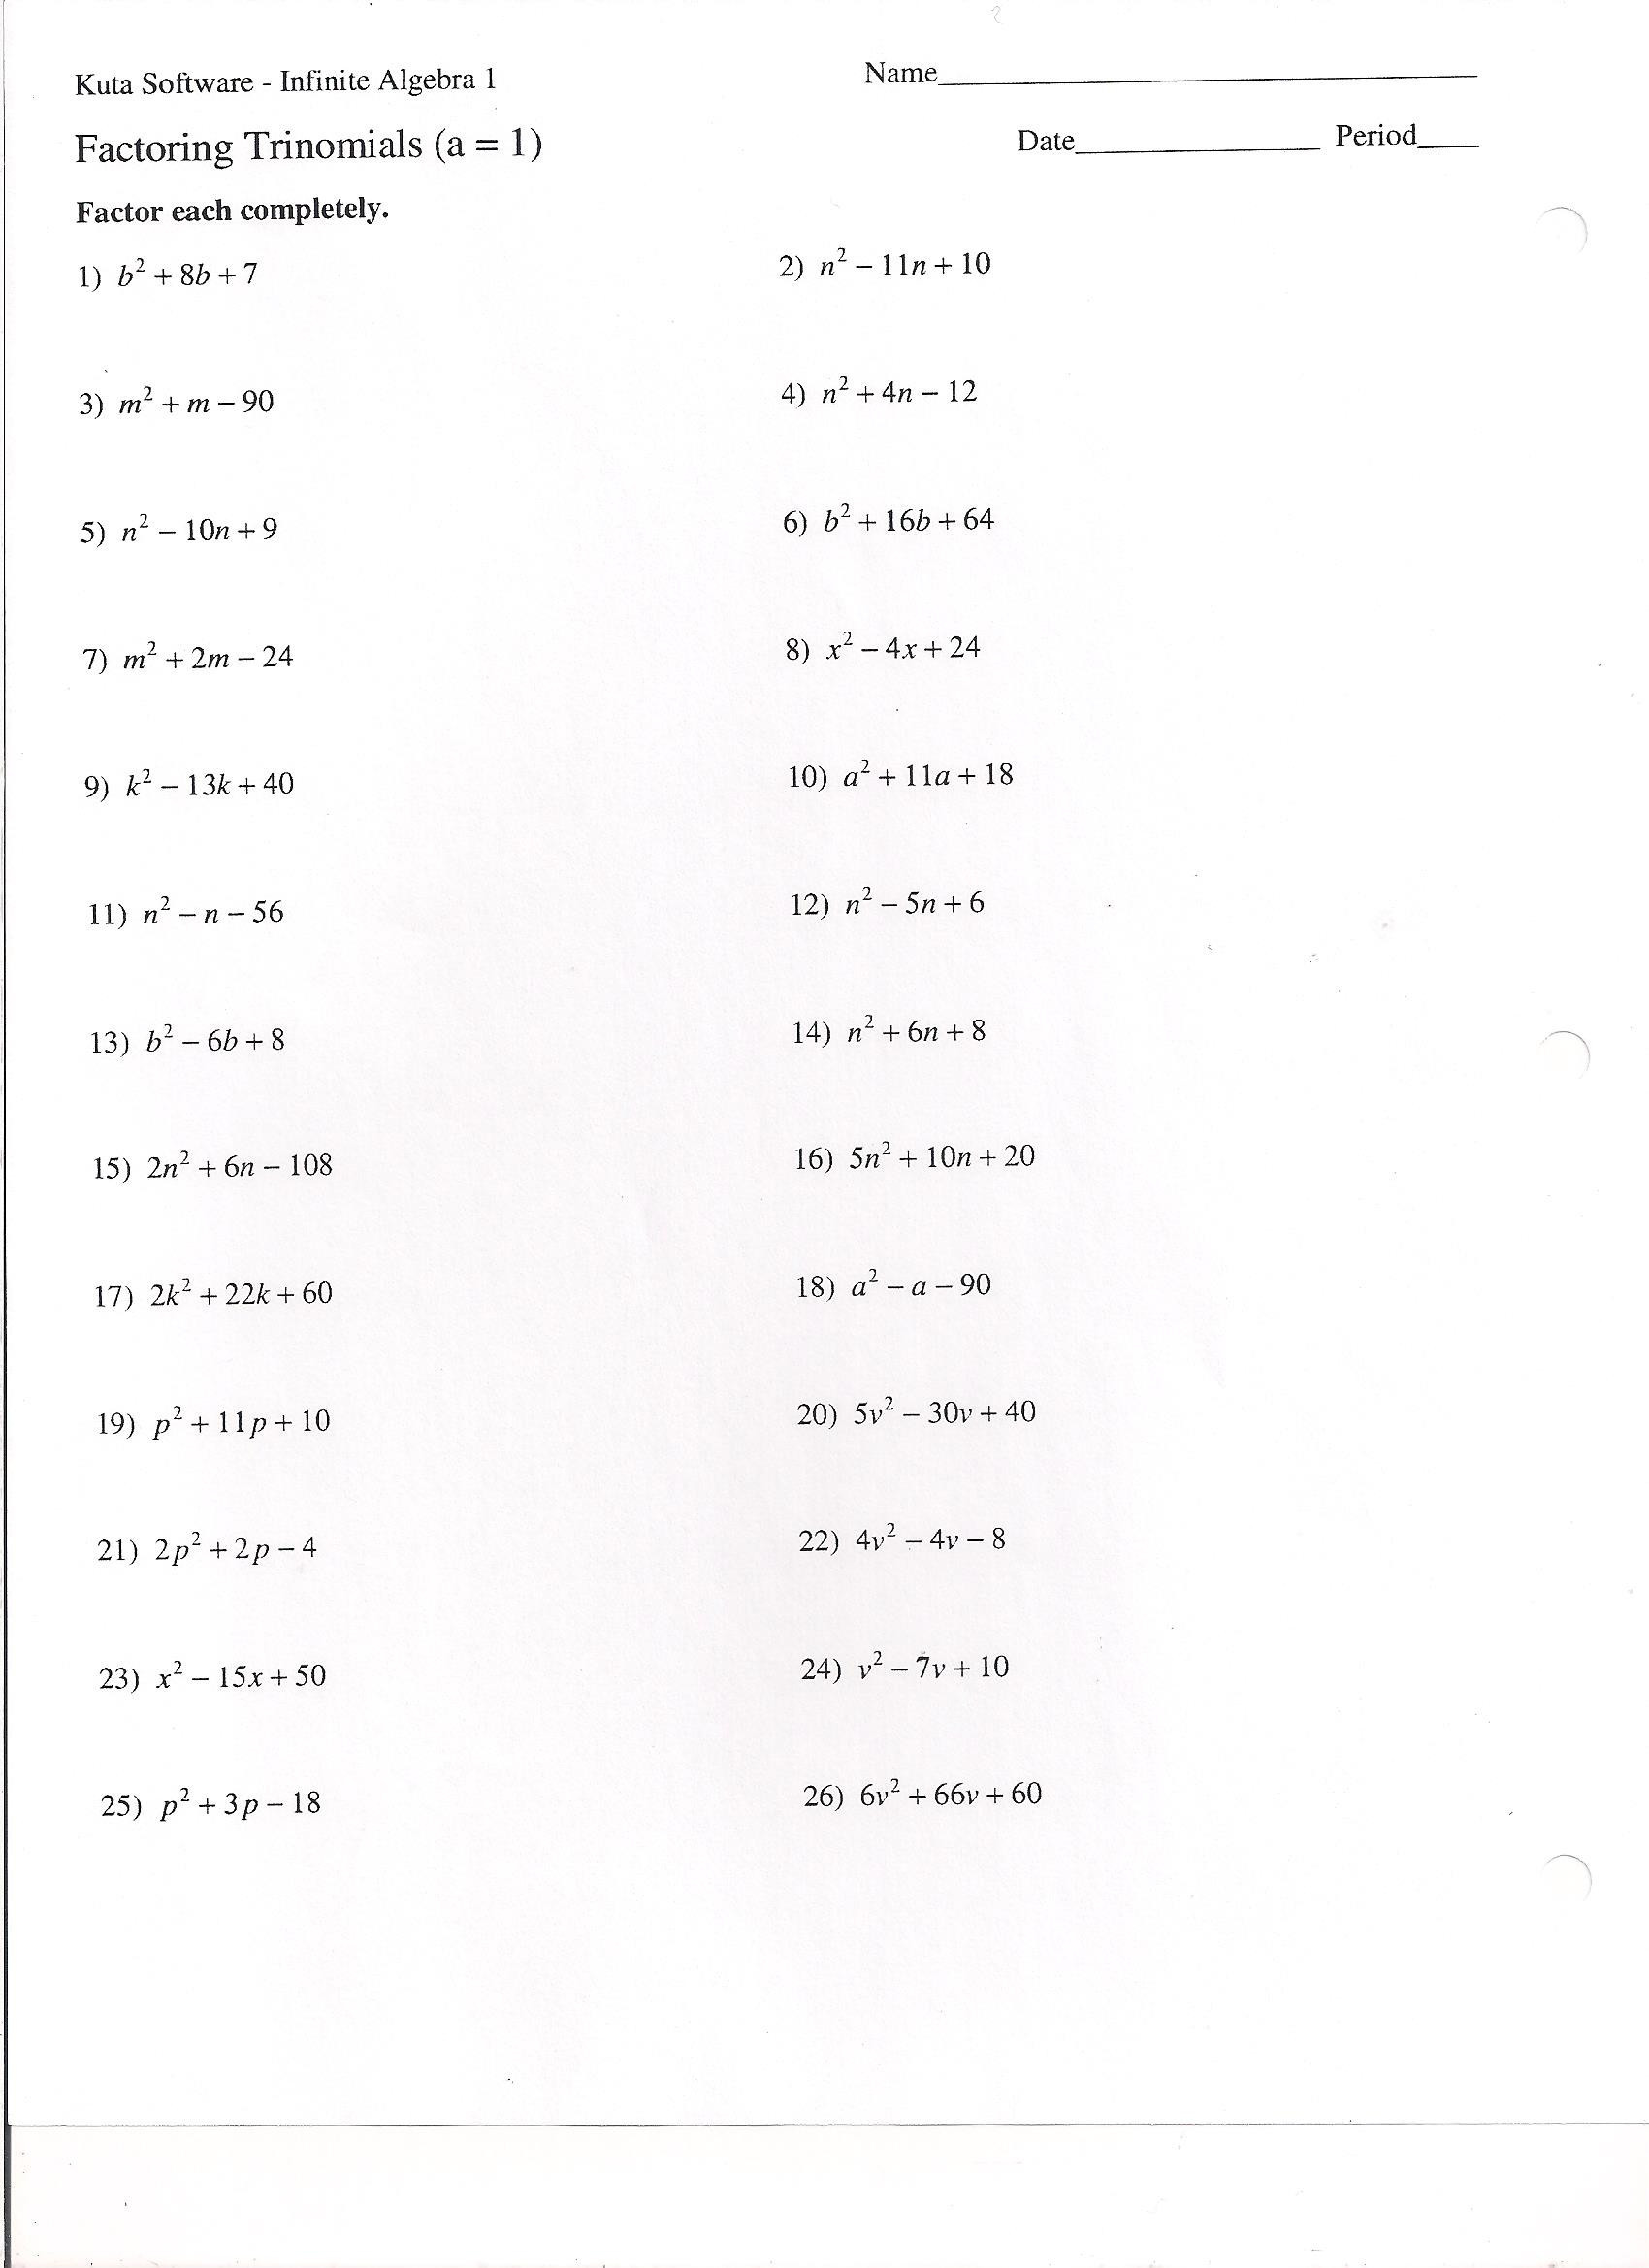 Factoring Trinomials Worksheet Answers Easy Factoring Trinomials Worksheets